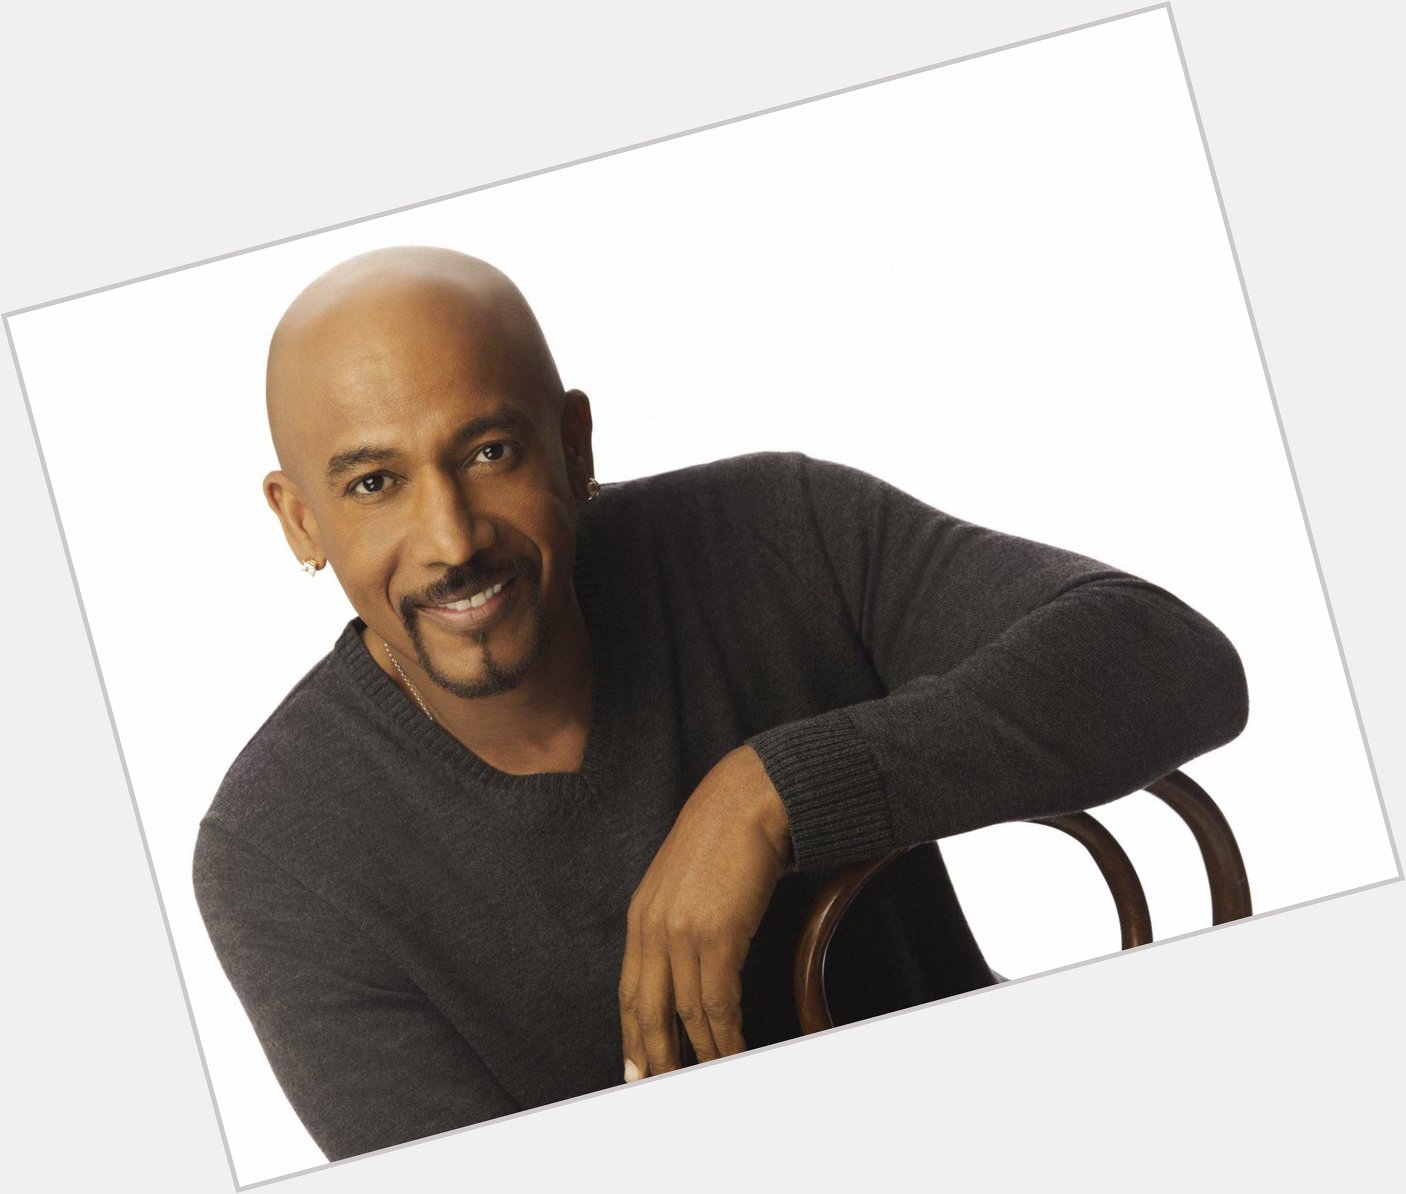 Happy Birthday to Montel Williams, who turns 59 today! 